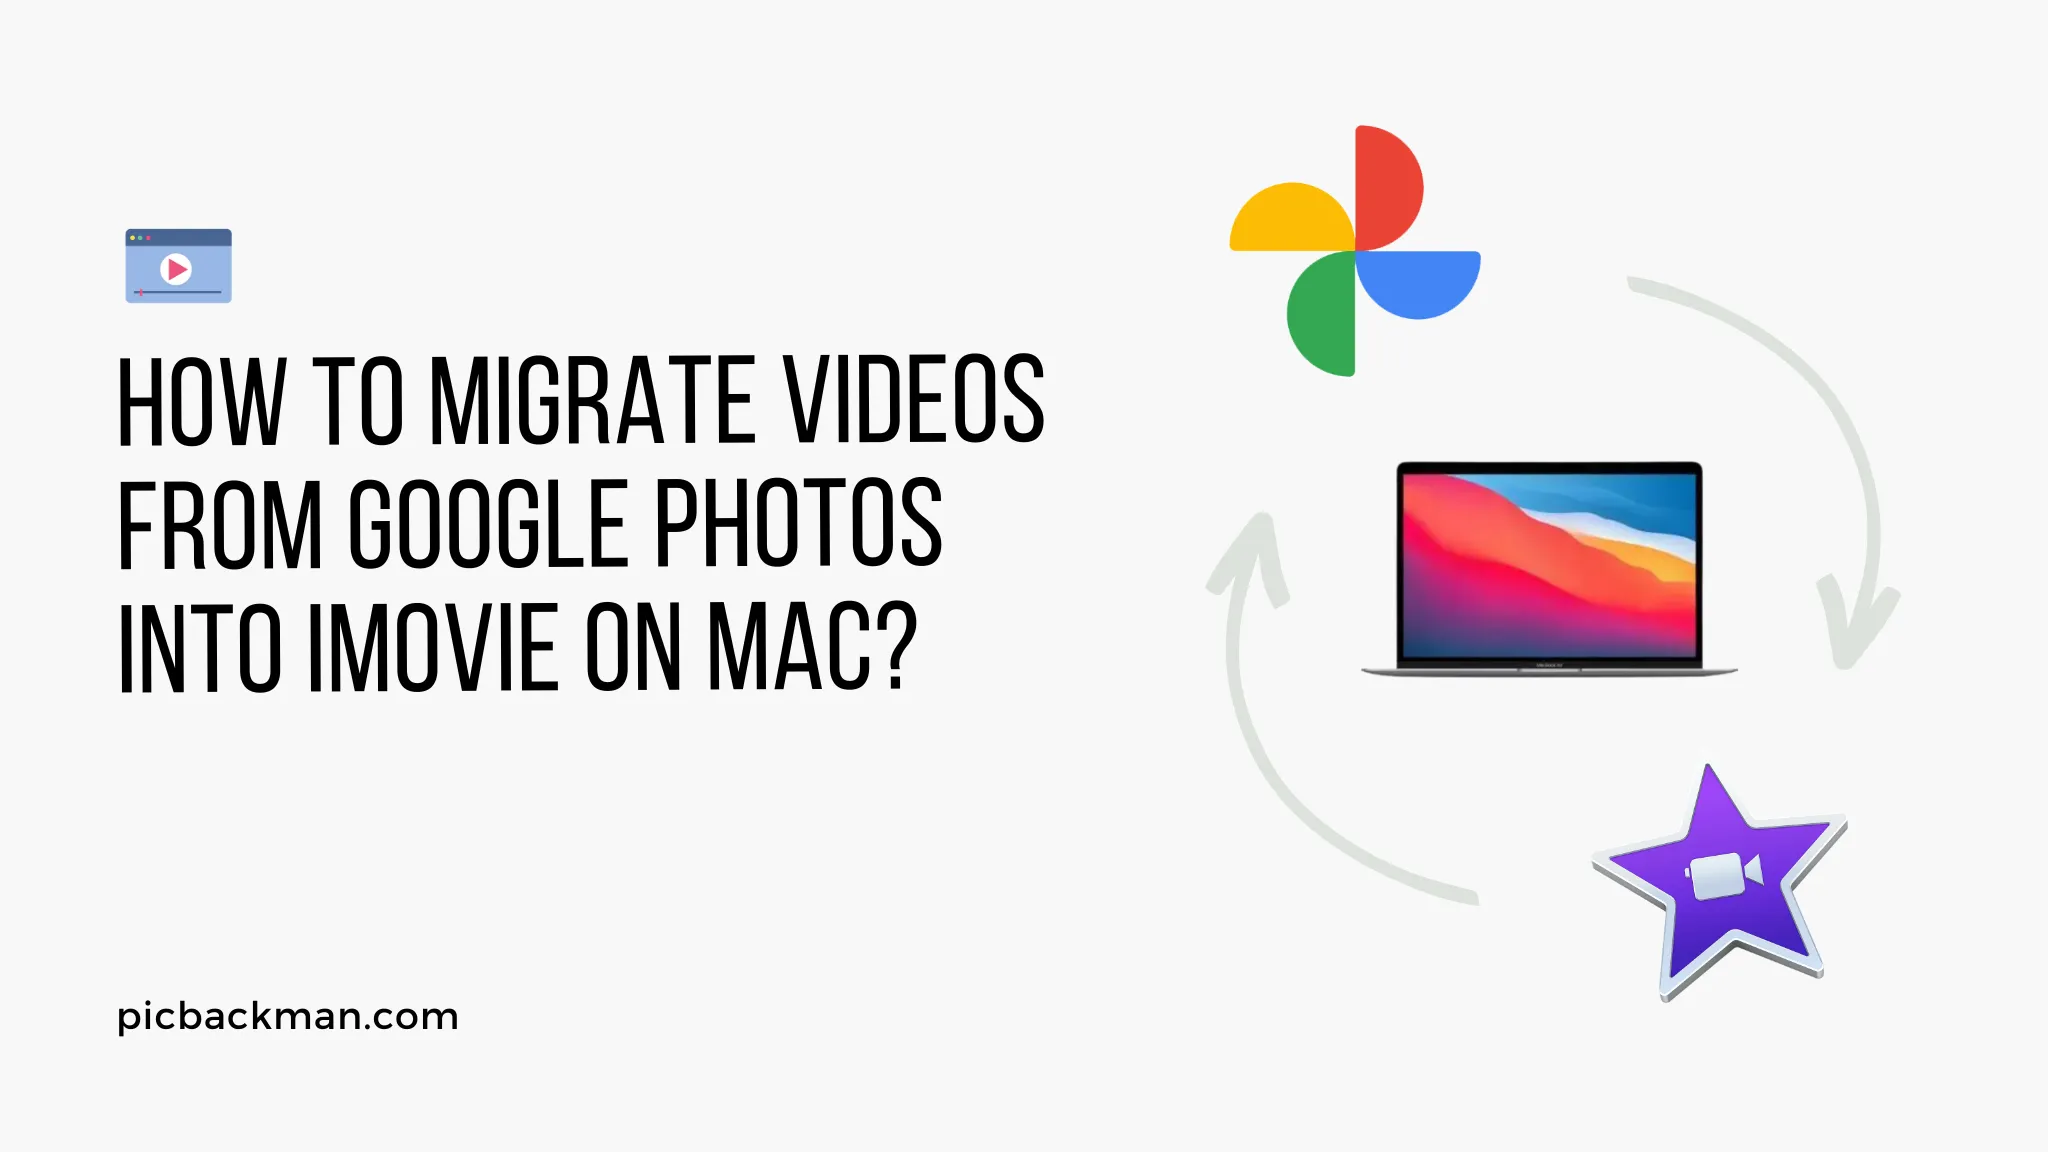 How to Migrate Videos from Google Photos into iMovie on Mac